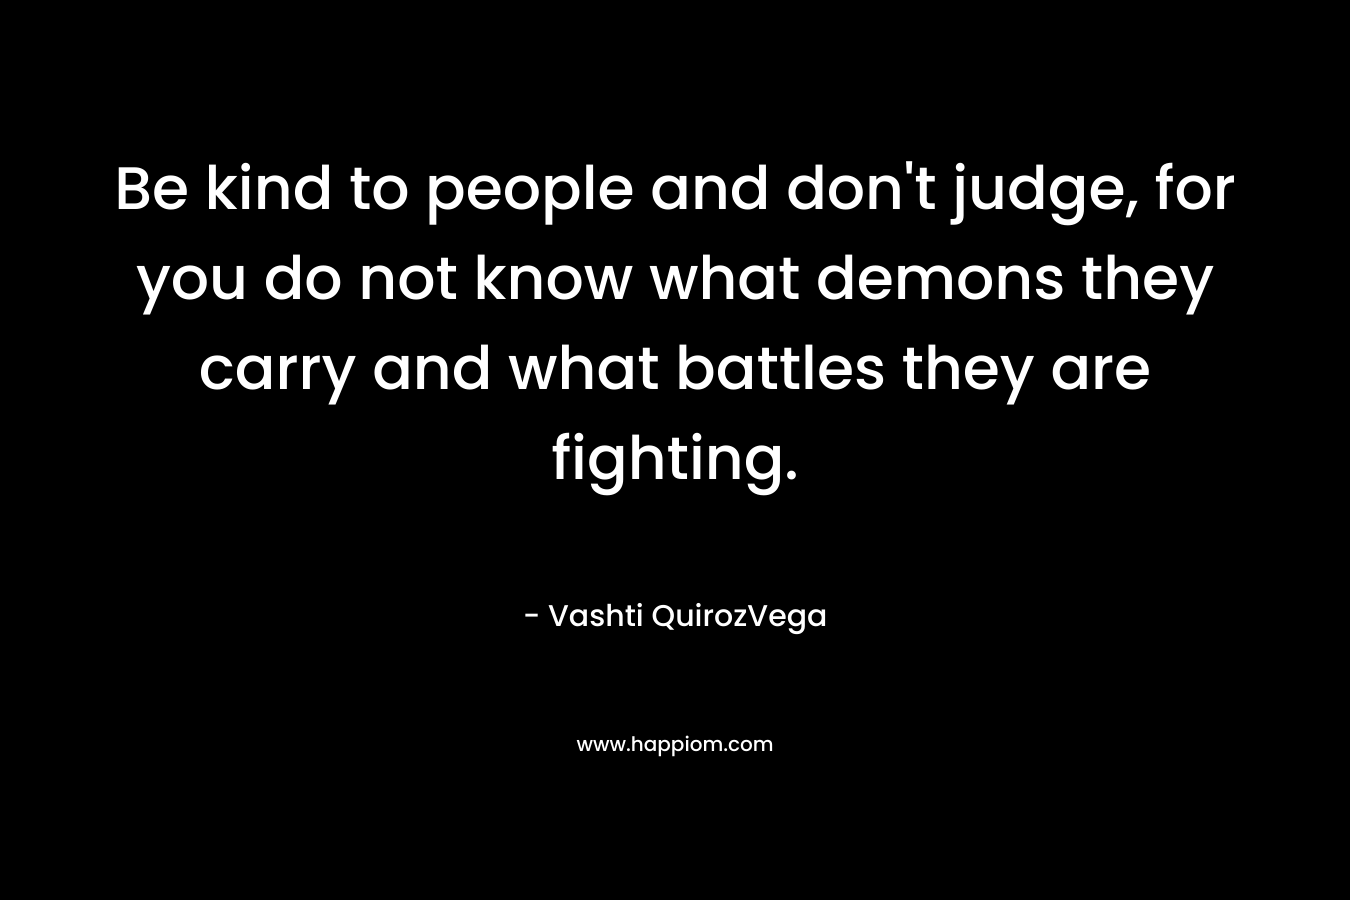 Be kind to people and don’t judge, for you do not know what demons they carry and what battles they are fighting. – Vashti QuirozVega